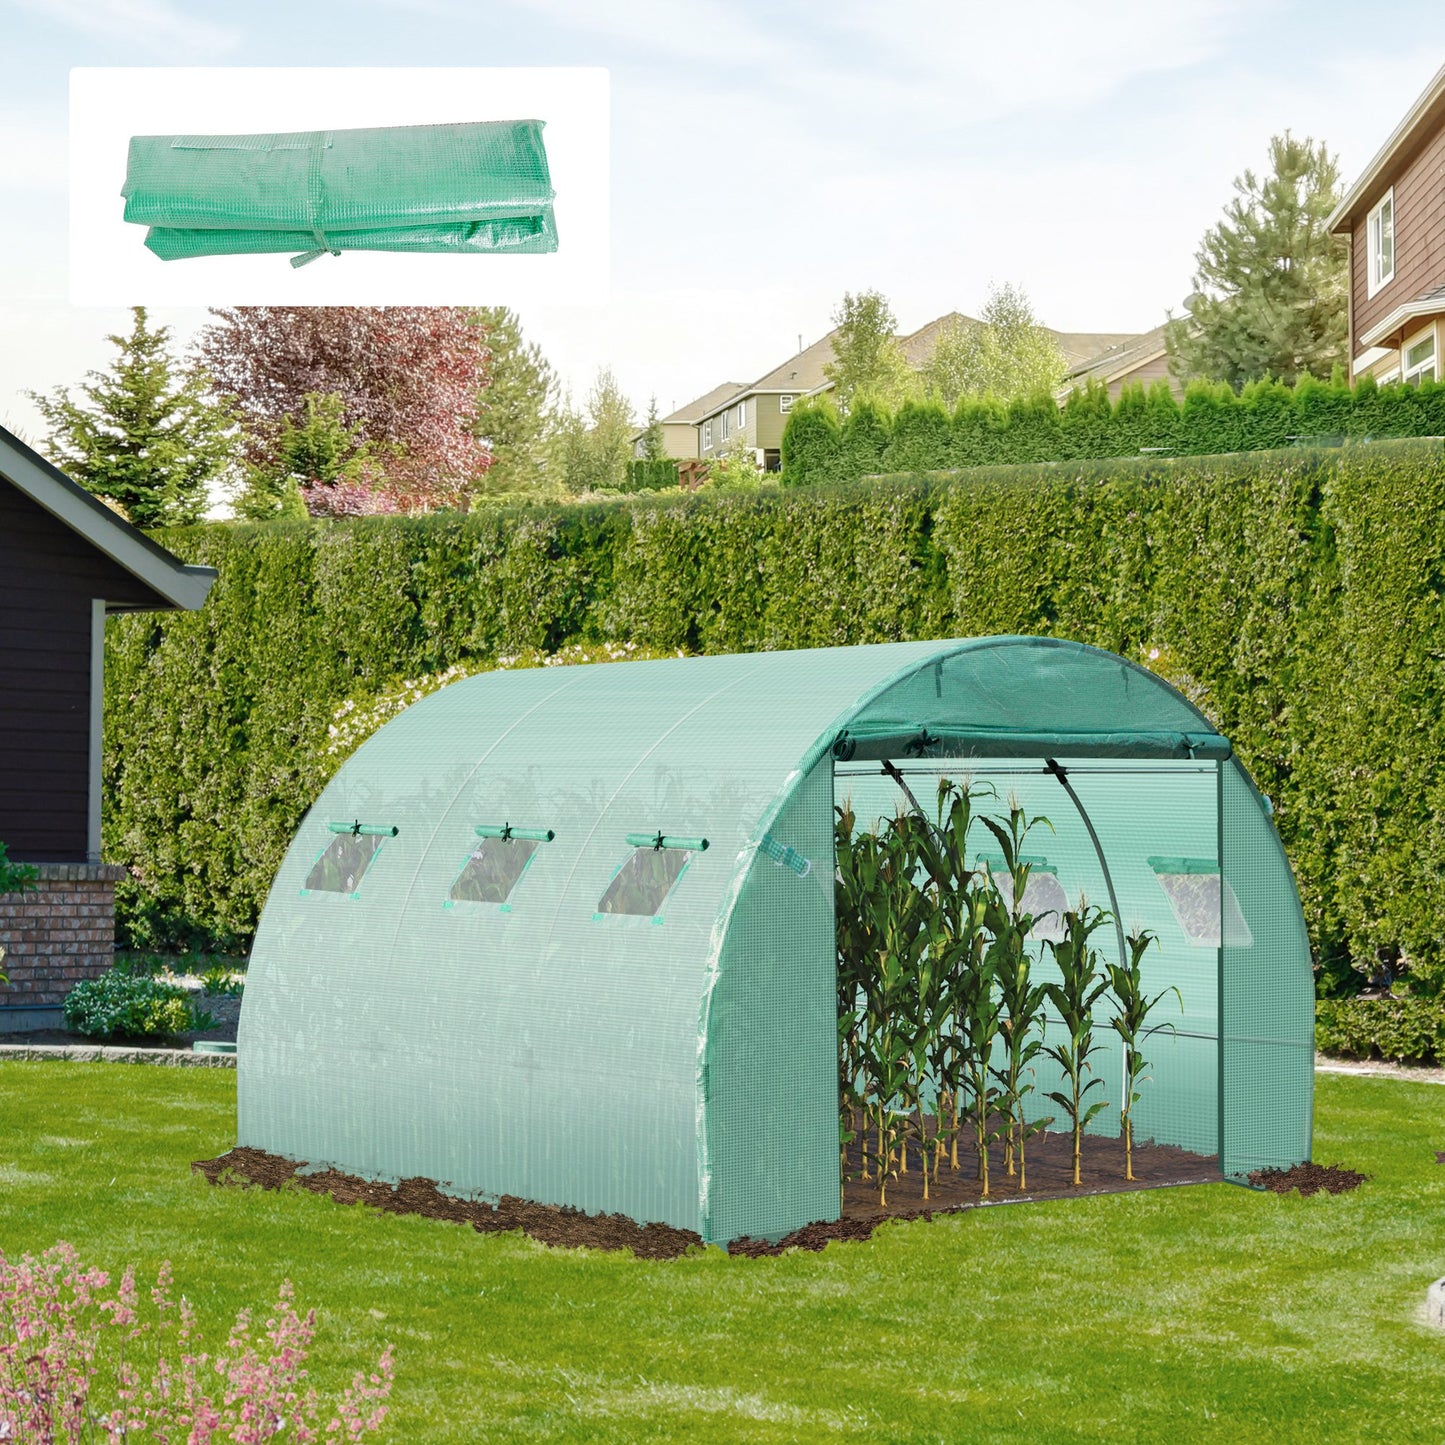 Outsunny 10X10ft Greenhouse Replacement Cover for Tunnel Walk-in Greenhouse w/ Windows Door